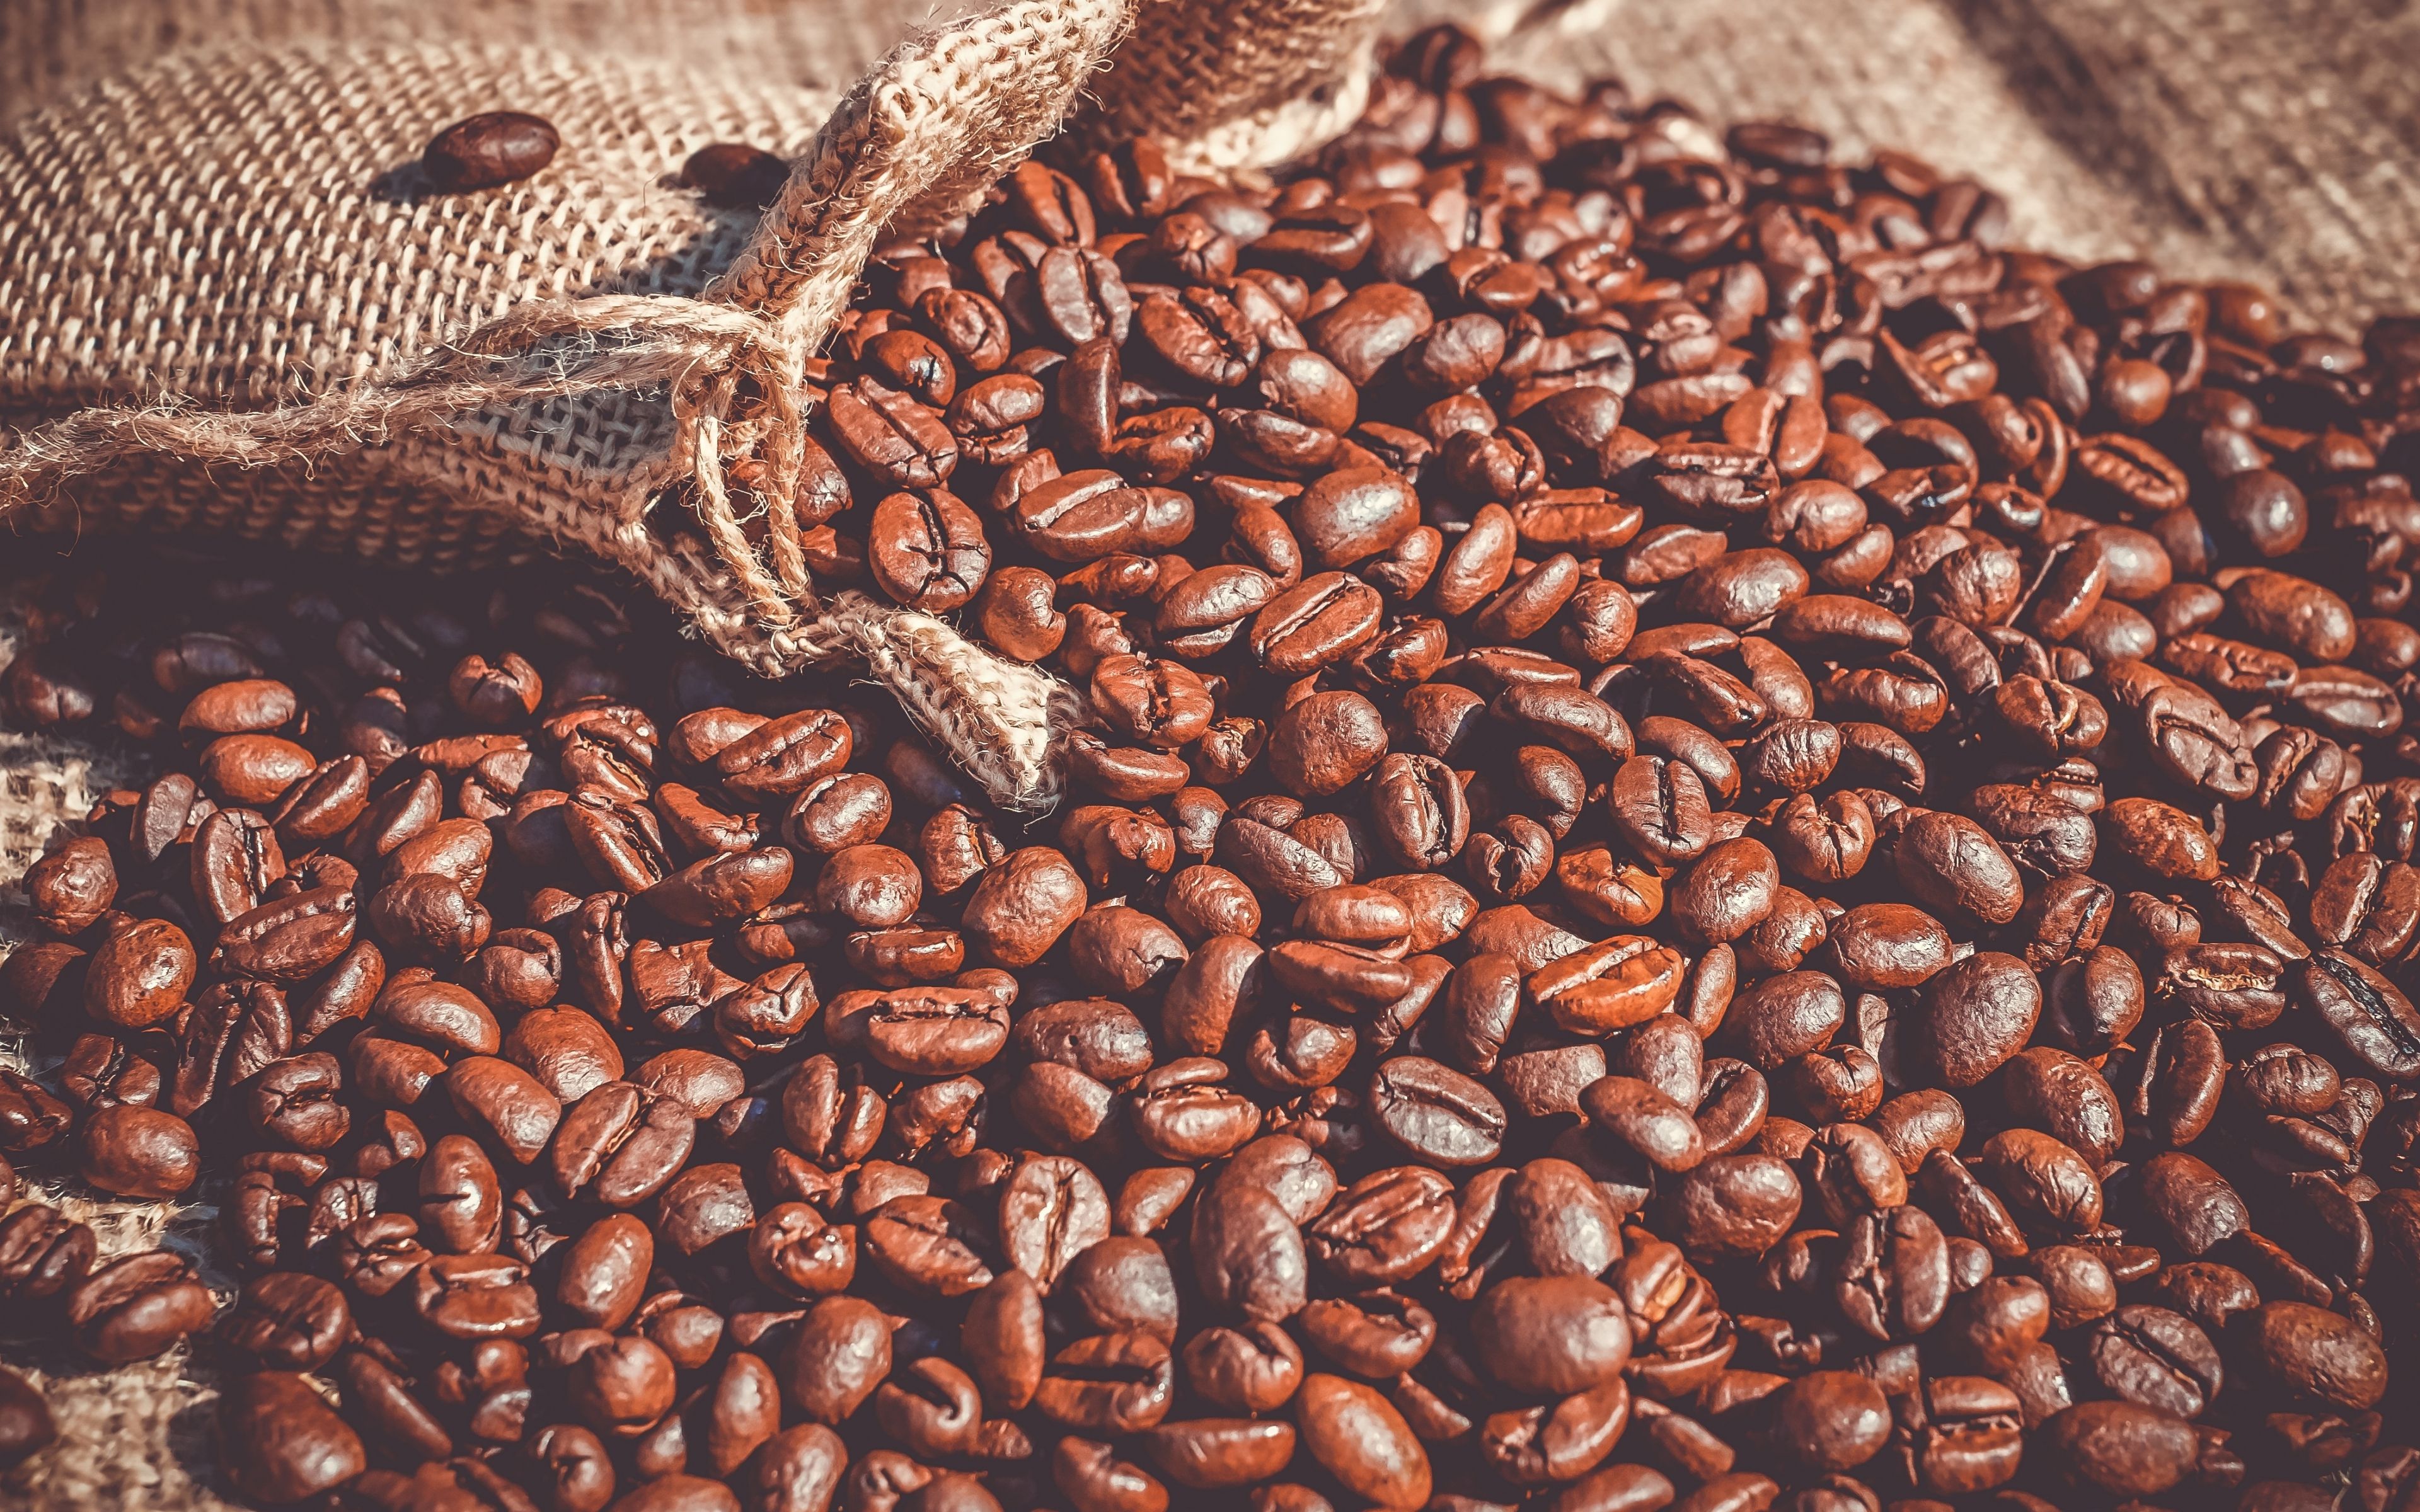 Download 3840x2400 wallpaper coffee beans, roasted, 4k, ultra HD 16: widescreen, 3840x2400 HD image, background, 7485